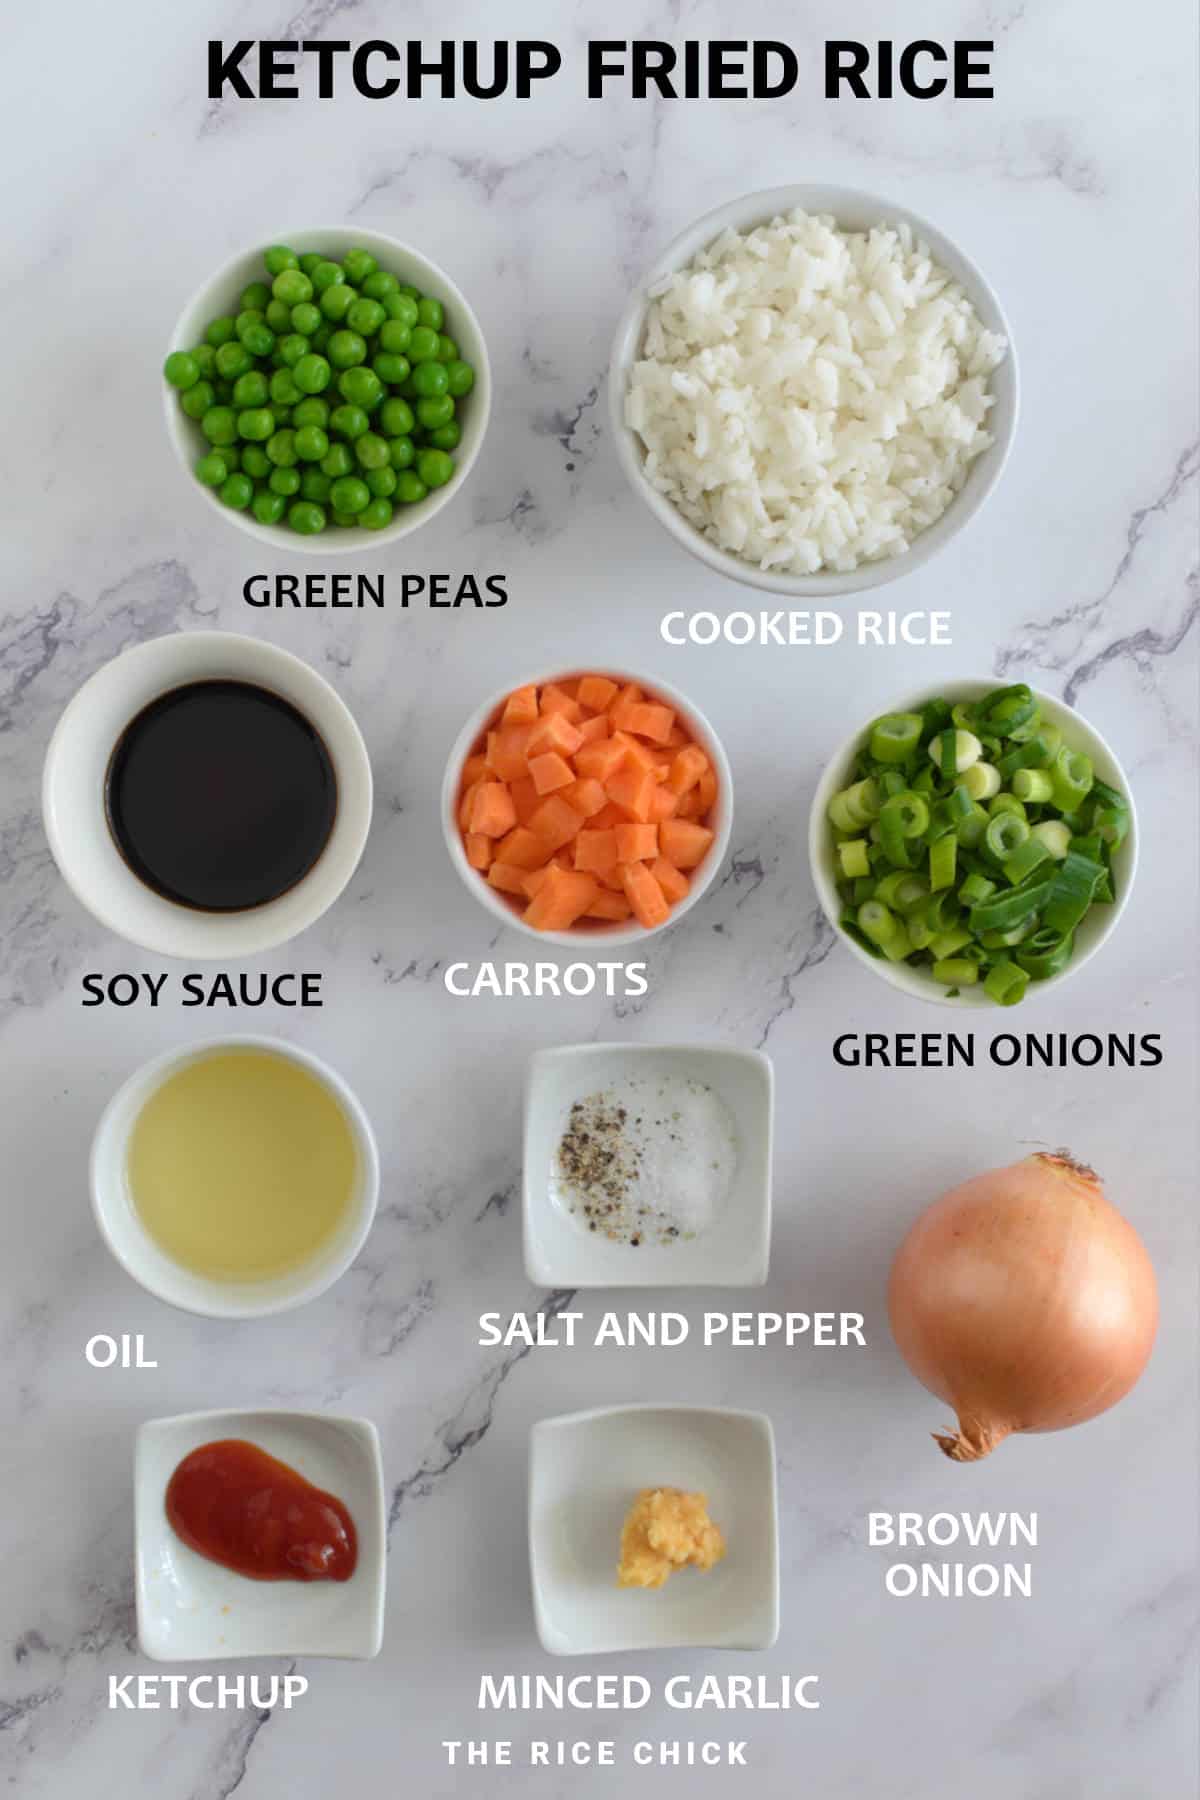 Ingredients for ketchup fried rice.